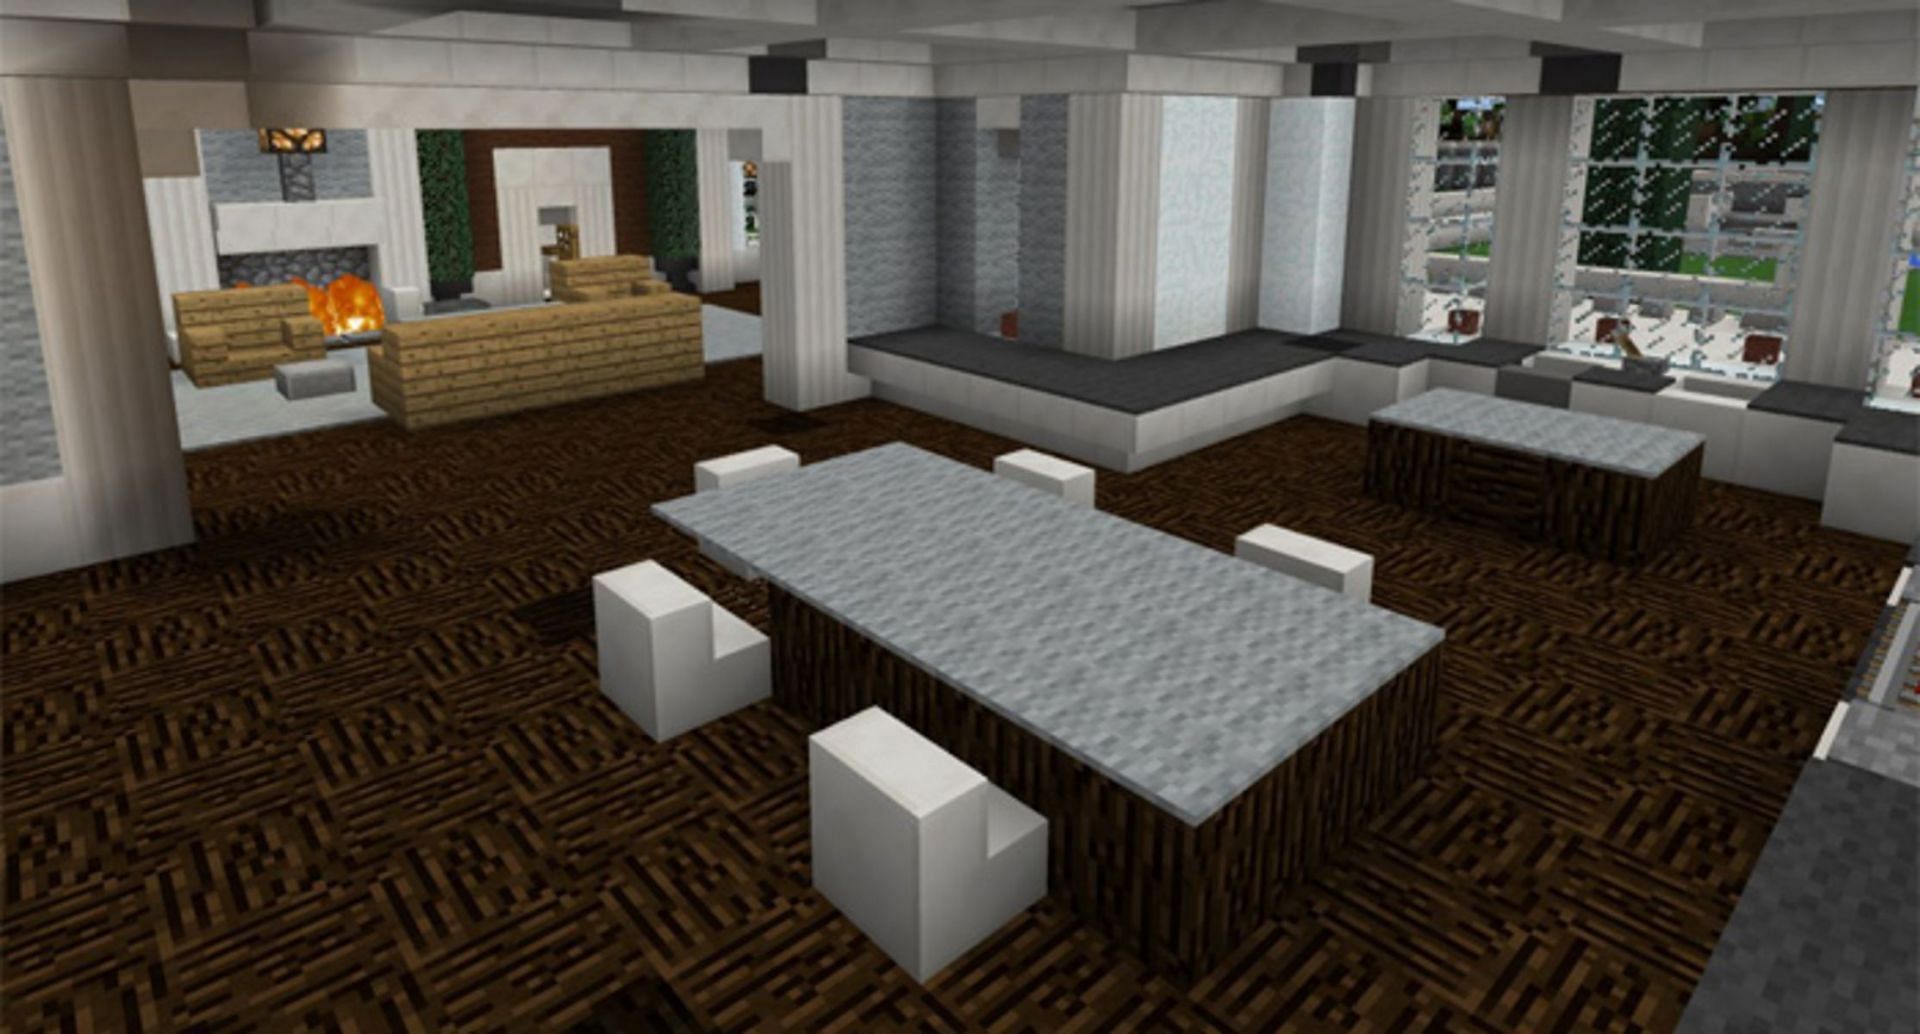 Mansion furniture is made from accessible materials such as wool, stone, quartz, and wood logs (Image via Mojang)